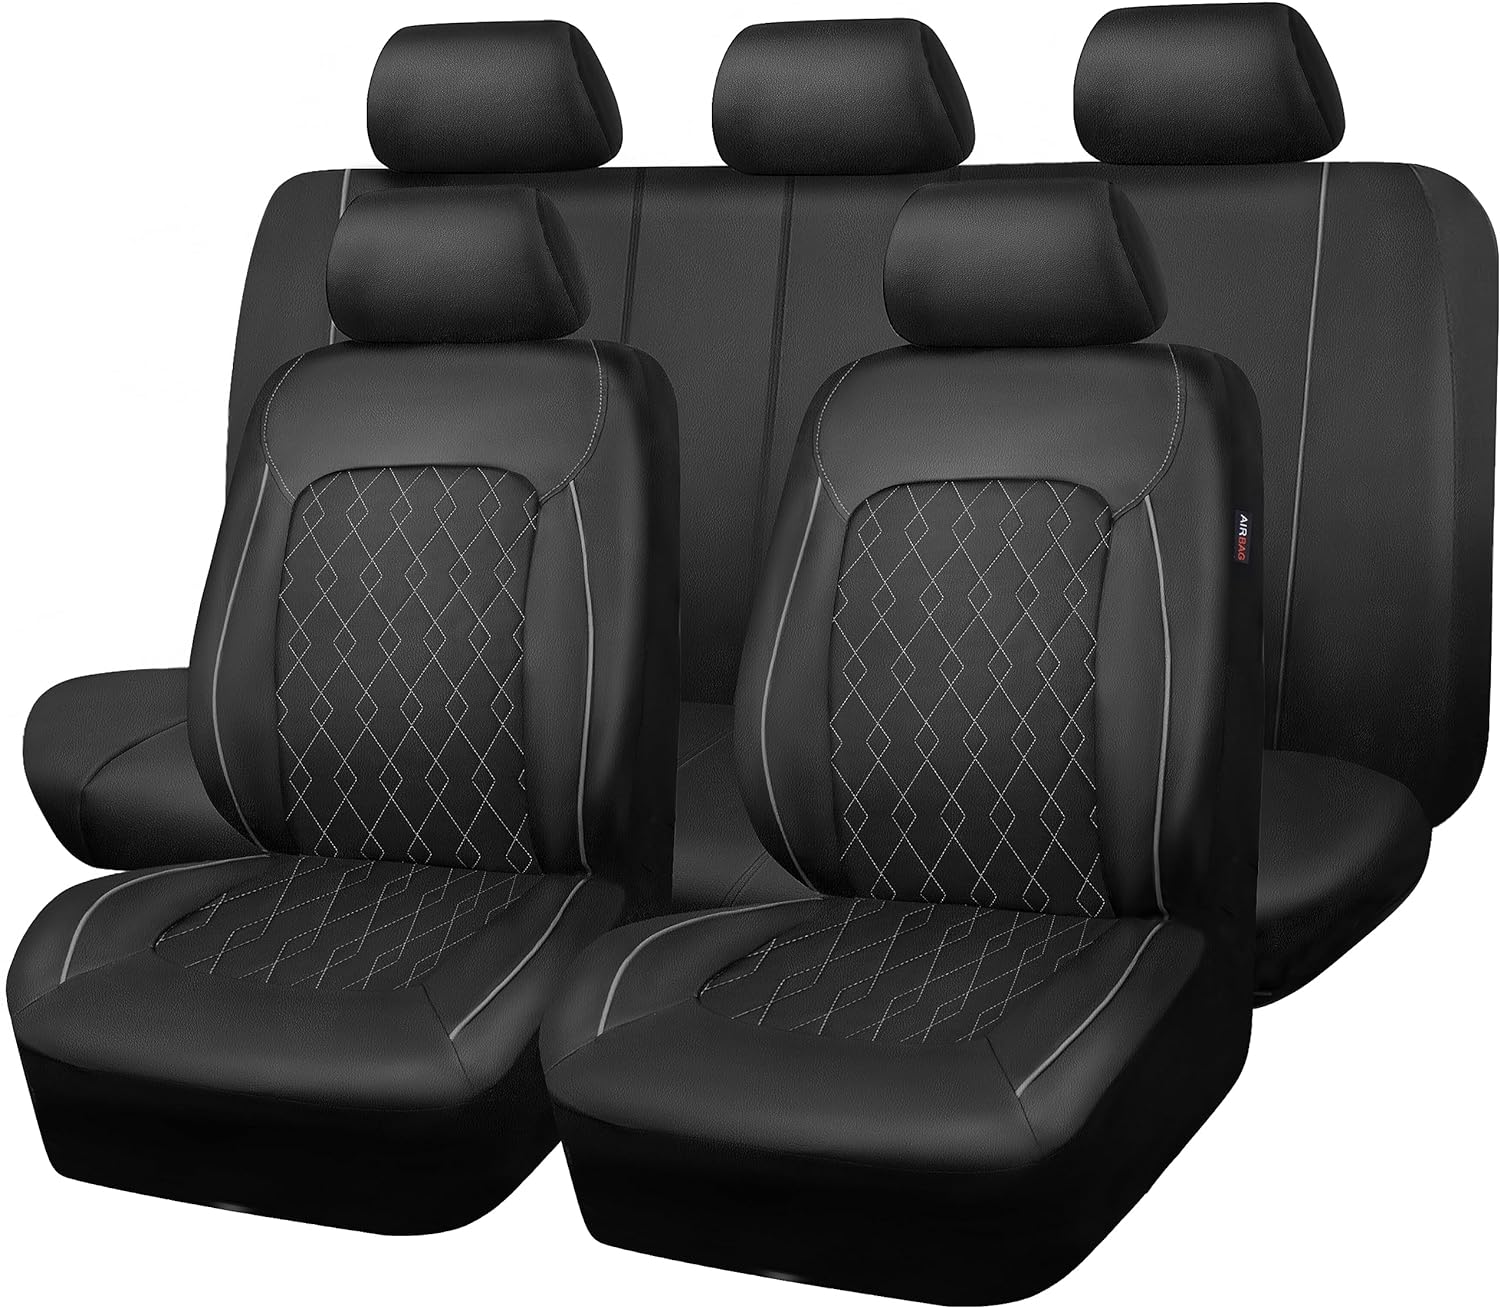 CAR PASS PU Leather Car Seat Covers Full Set Fit Most Cars Trucks SUVS Auto Seat Covers Set Car Seat Protector Car Seat Cover with Zipper Design, Airbag Compatible (Full seat Black Gray)